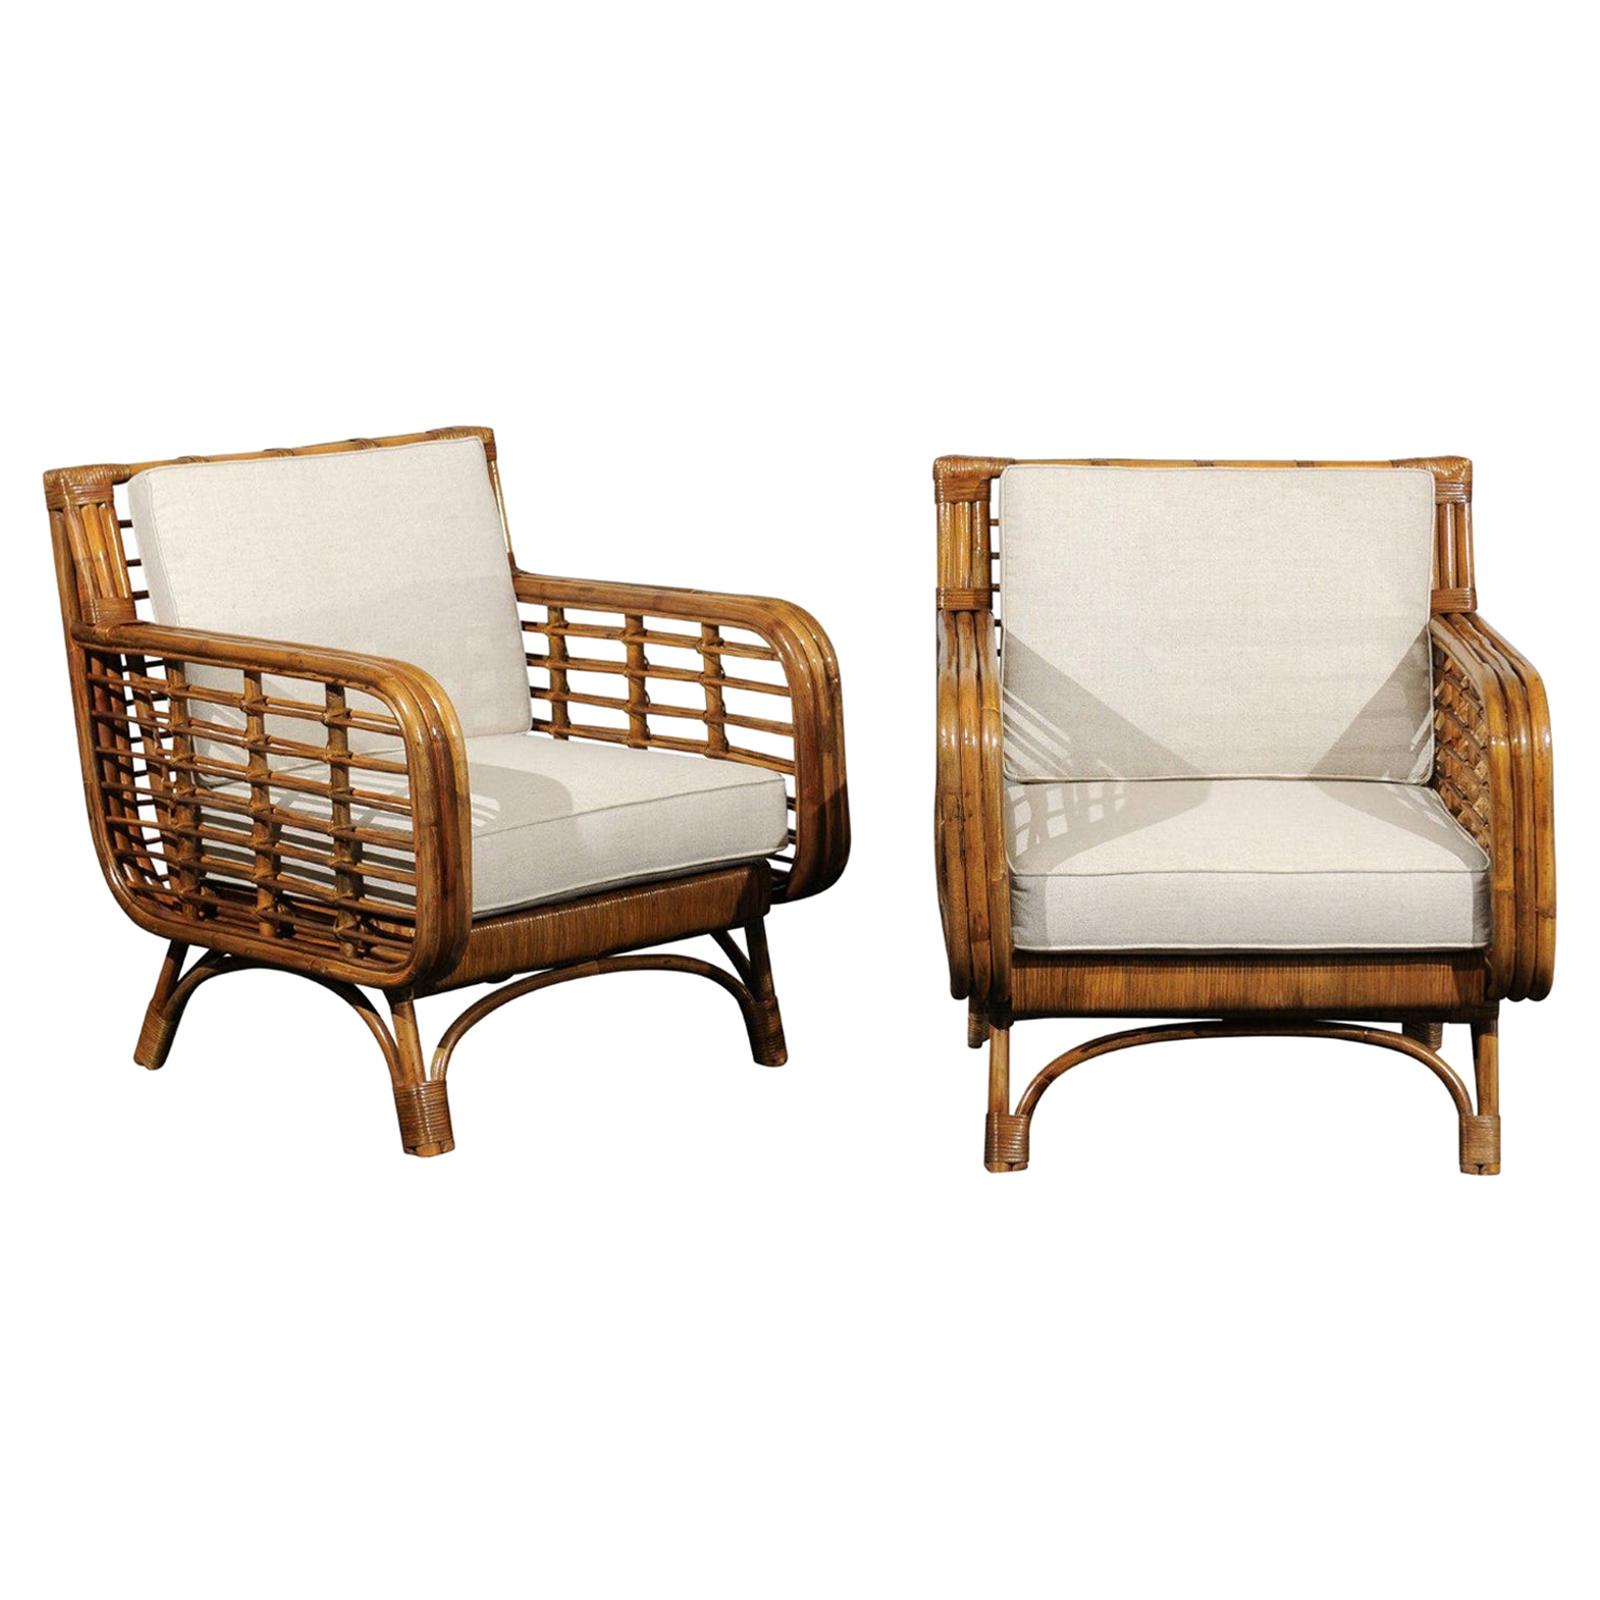 Set of 4 Fabulous Restored Birdcage Style Rattan and Cane Loungers, circa 1955 For Sale